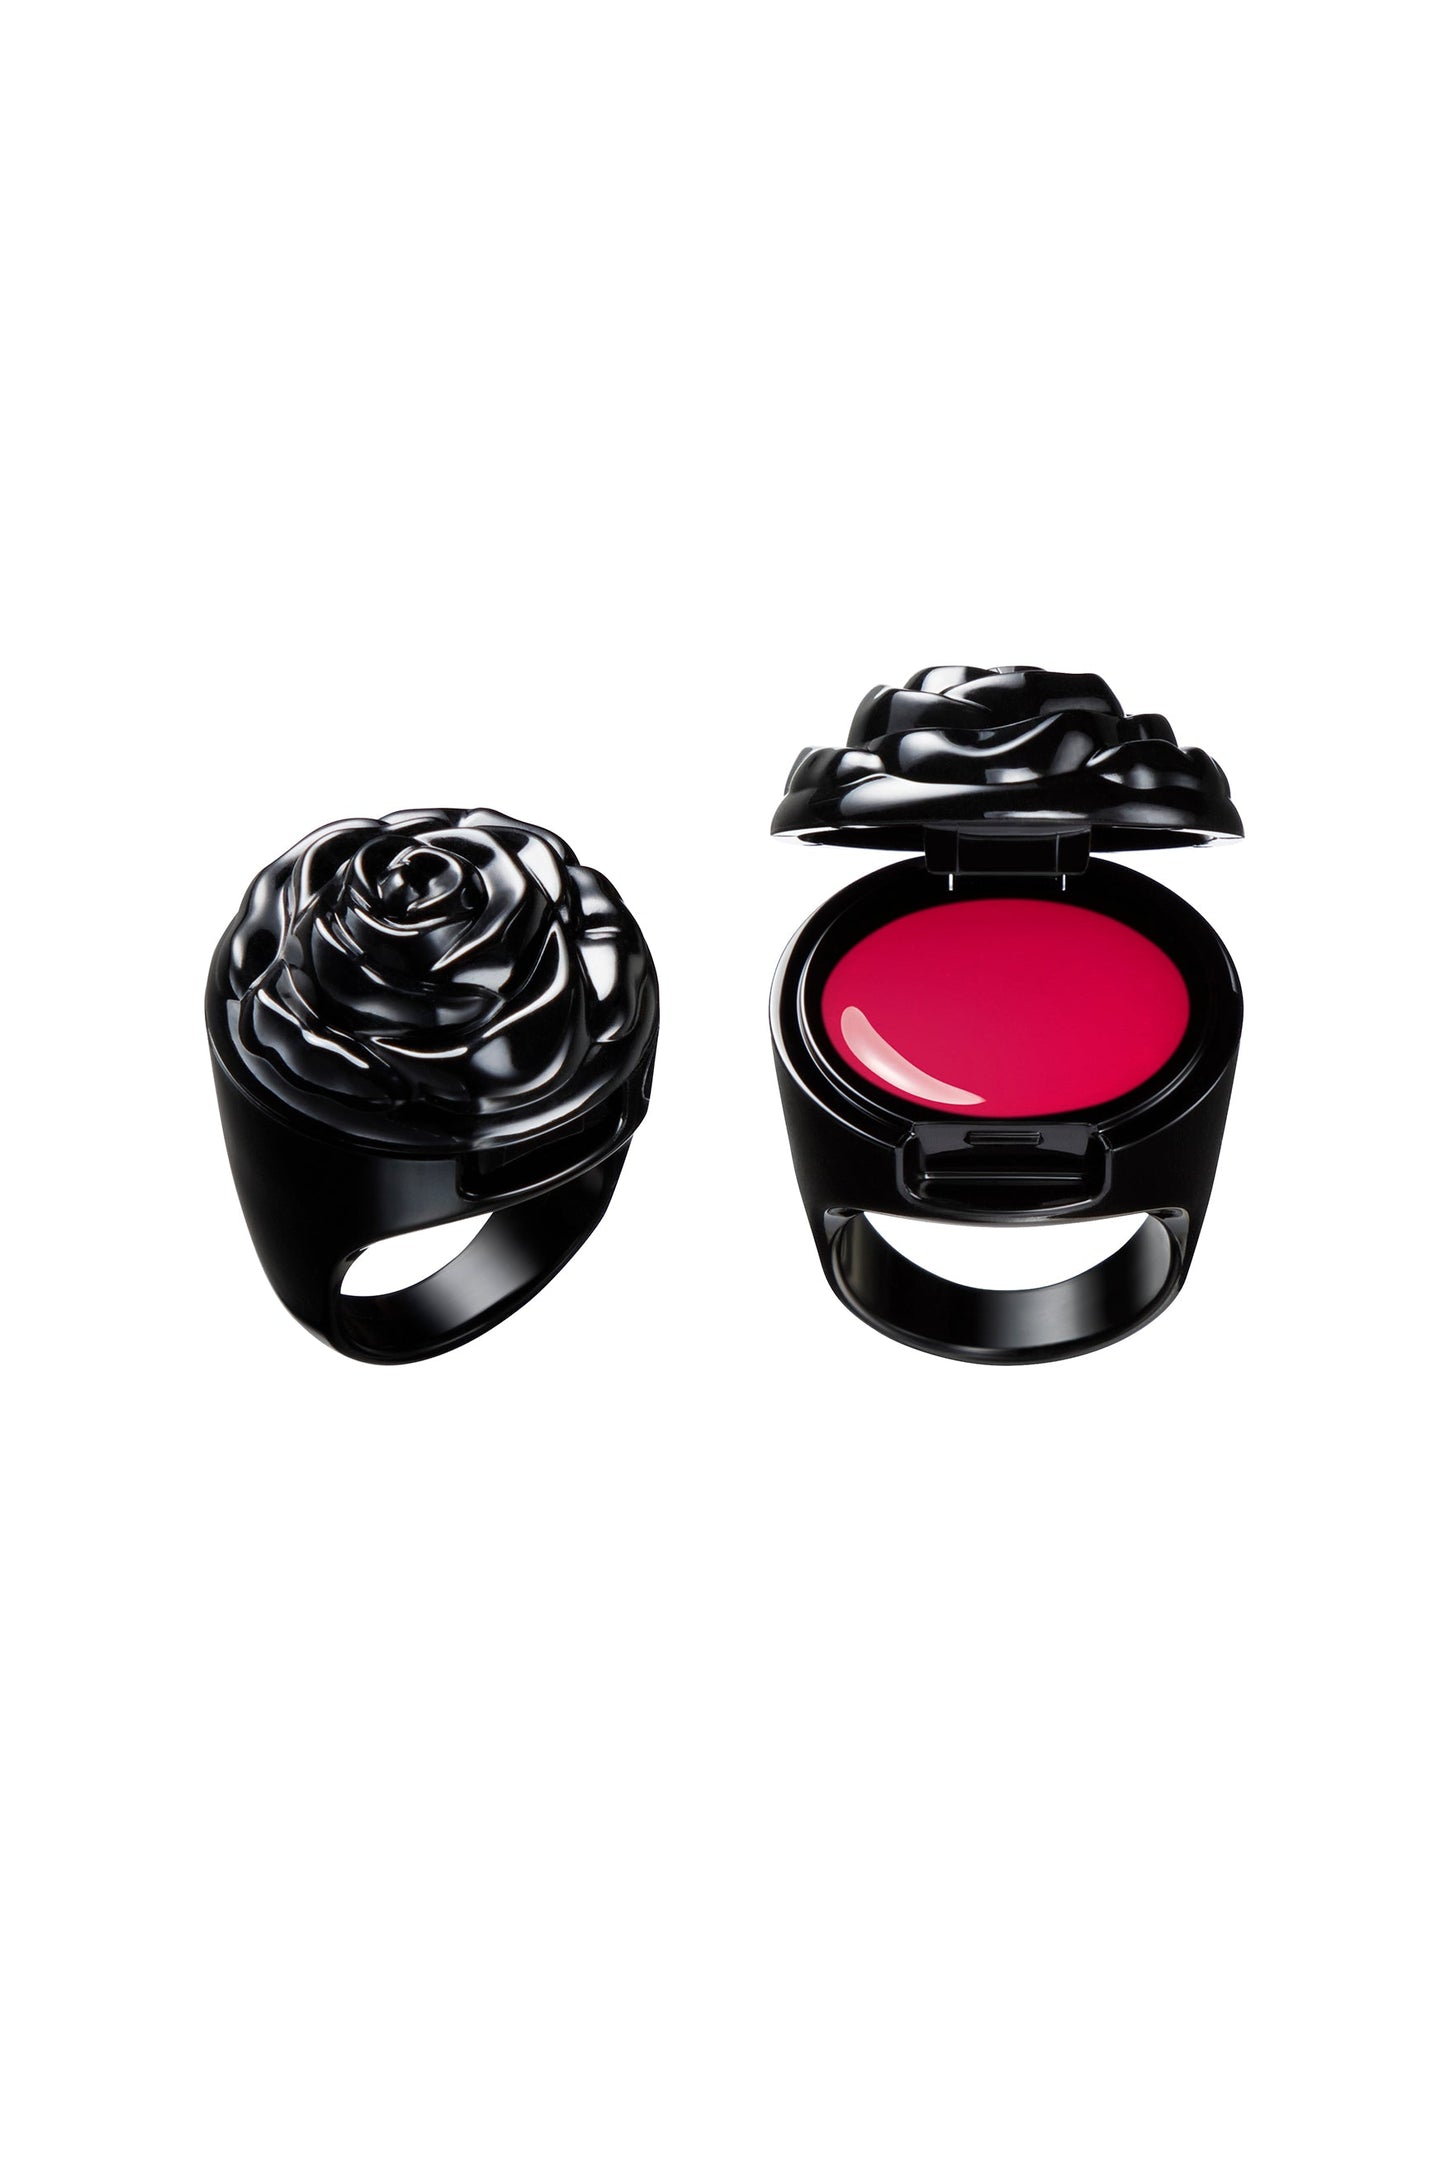 TRUE RED in a black ring container, black rose as a cap, makeup inside